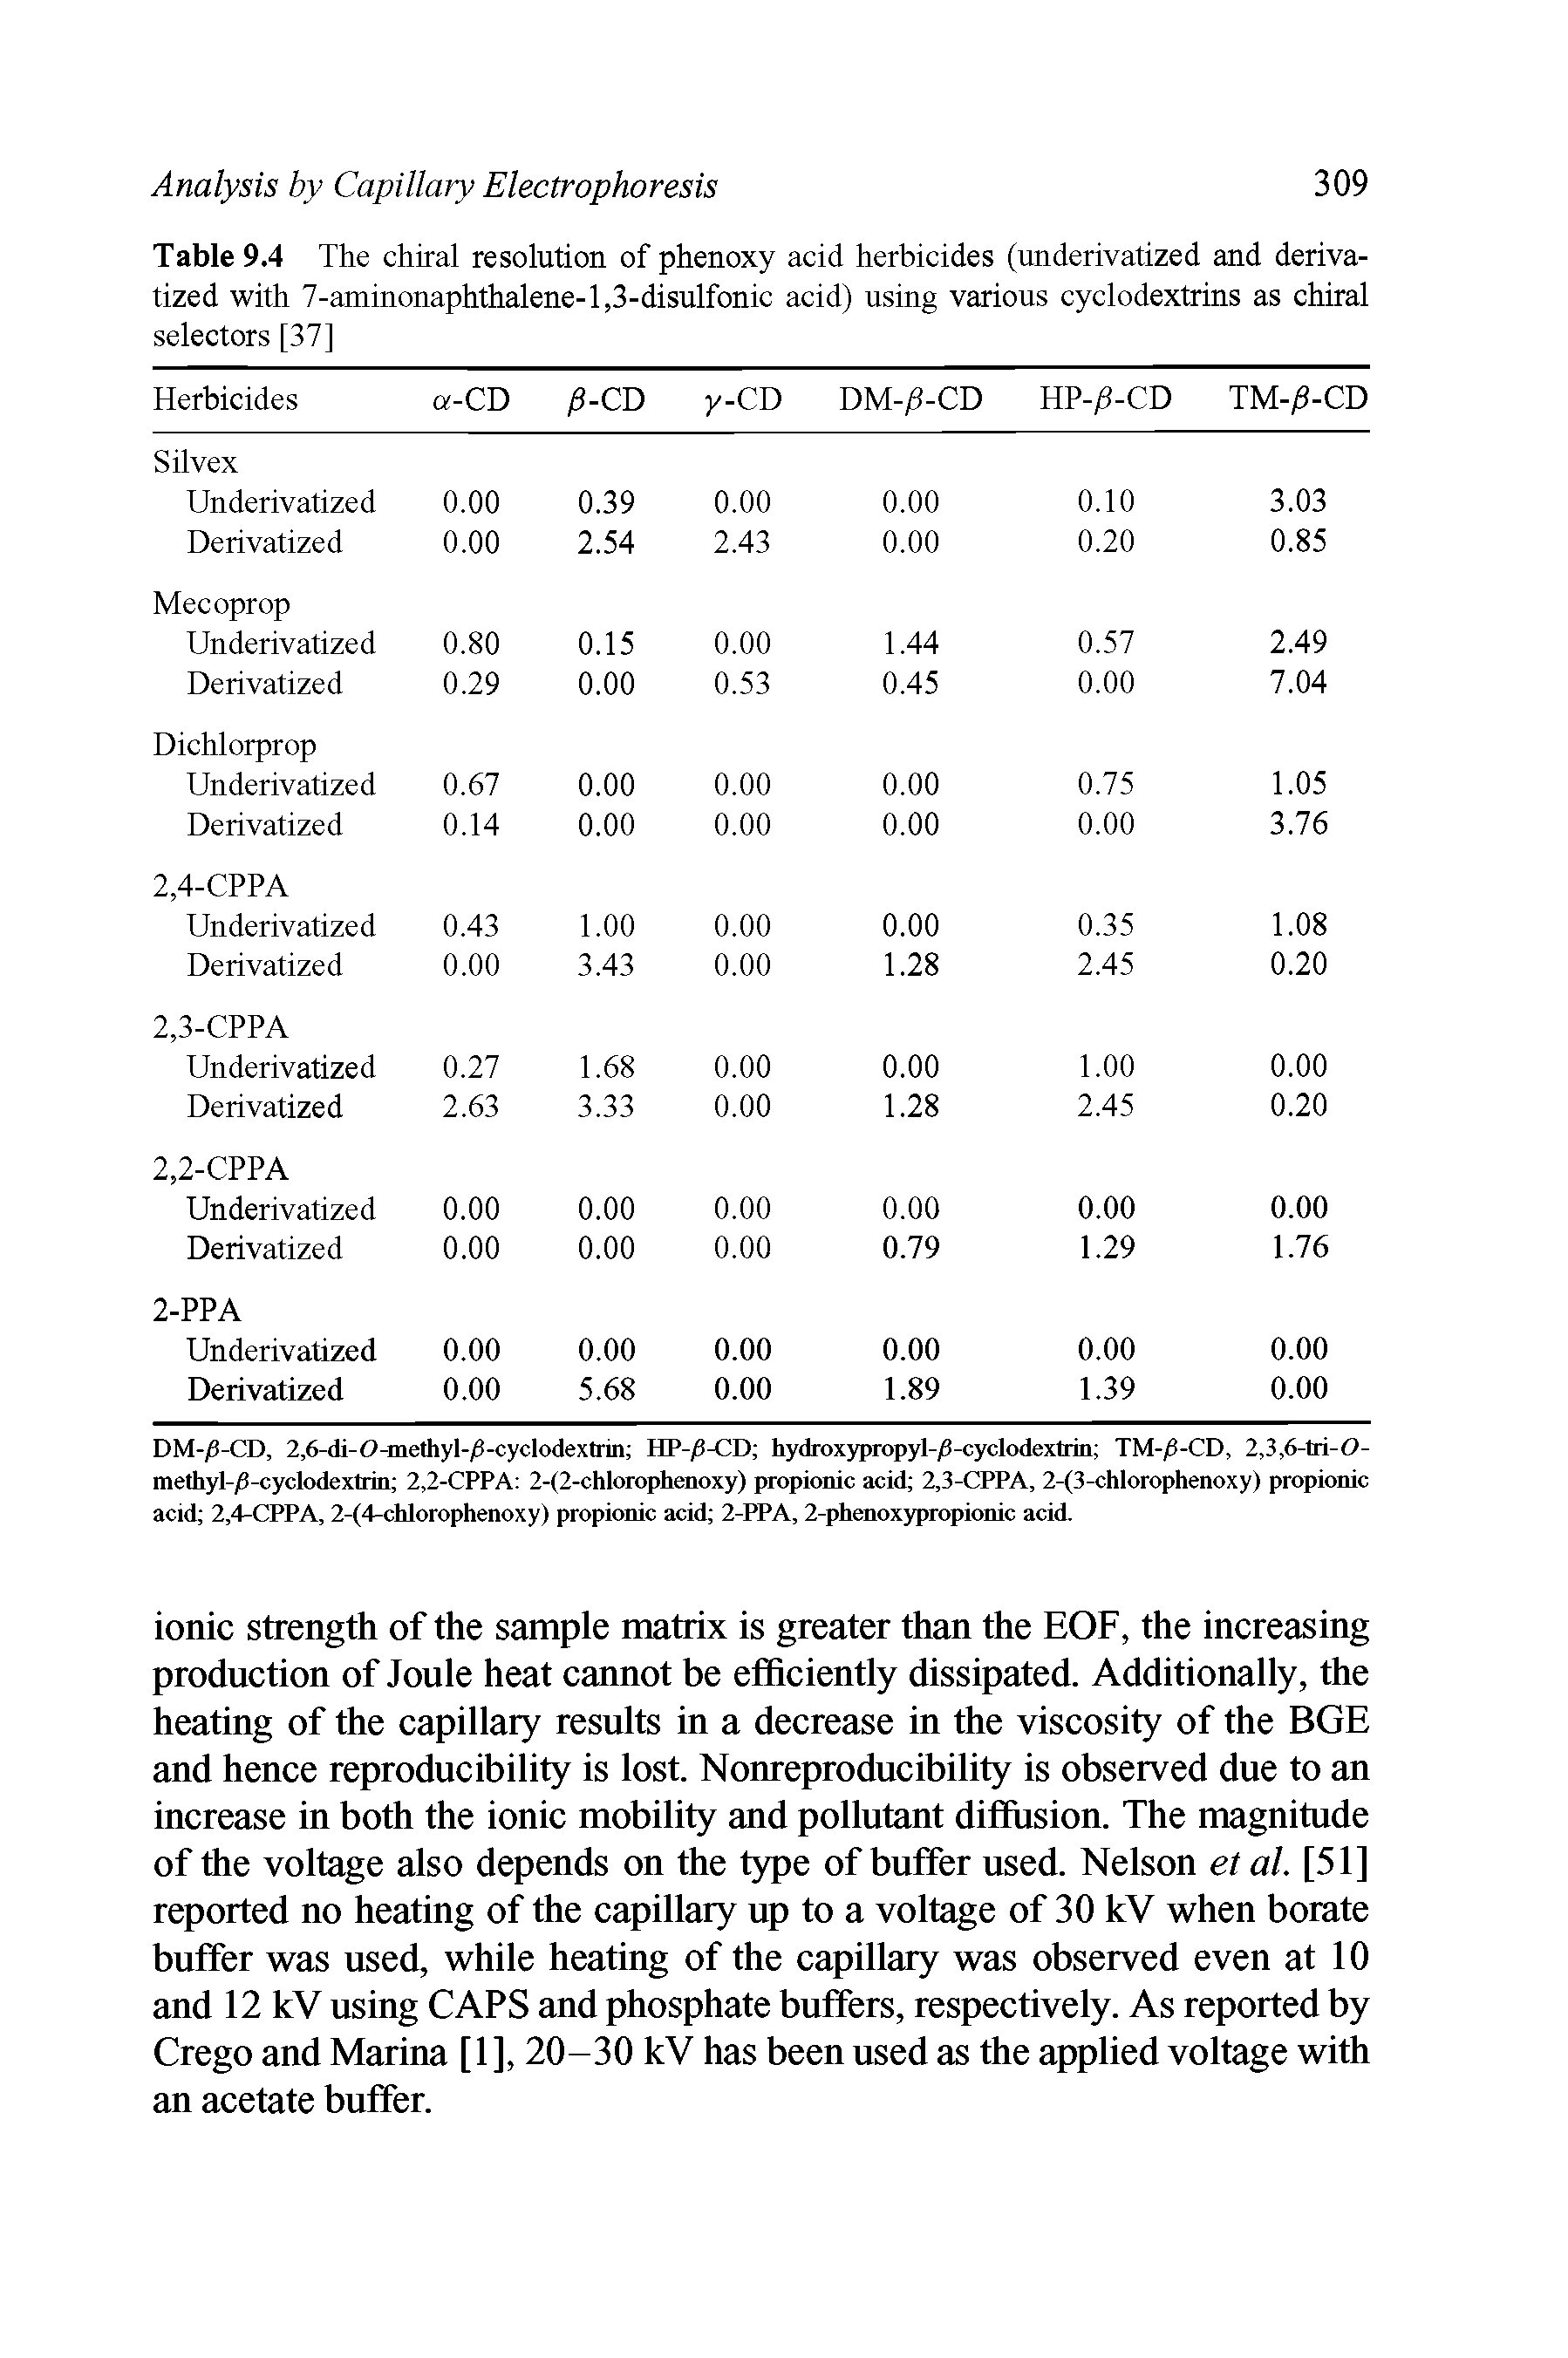 Table 9.4 The chiral resolution of phenoxy acid herbicides (underivatized and deriva-tized with 7-aminonaphthalene-l,3-disulfonic acid) using various cyclodextrins as chiral selectors [37]...